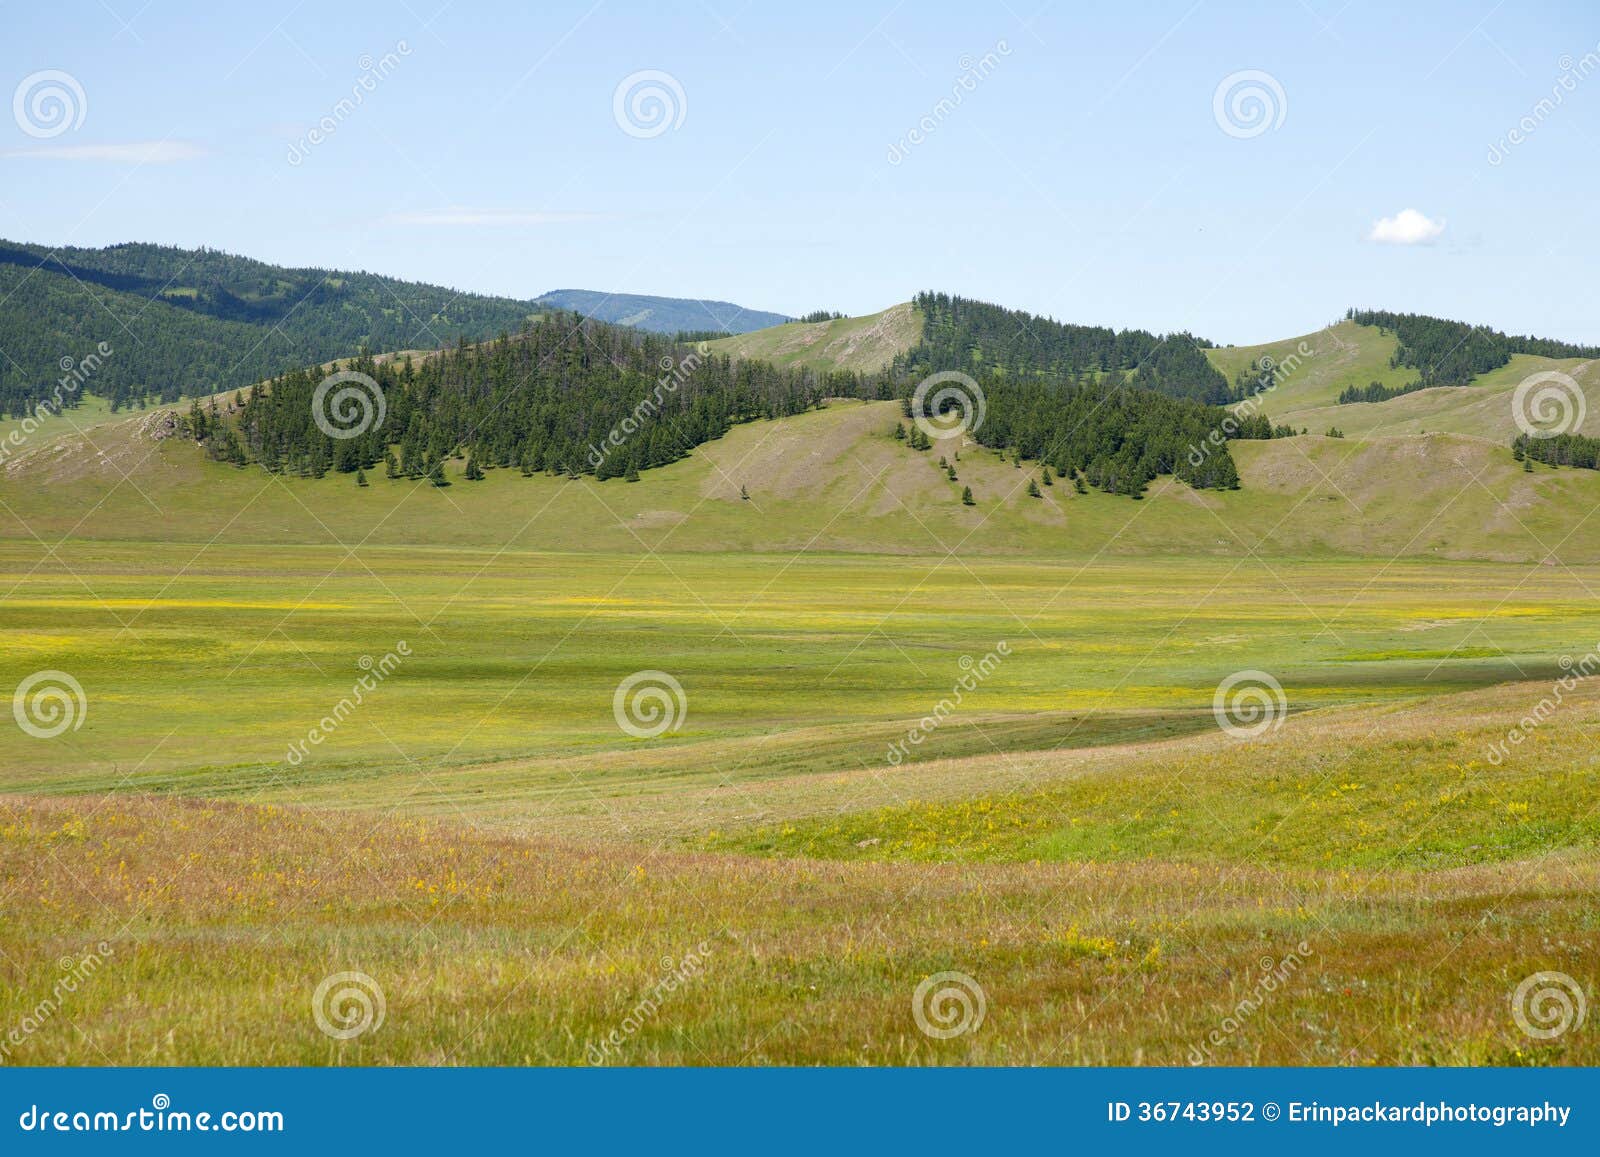 northern mongolian forests and steppes